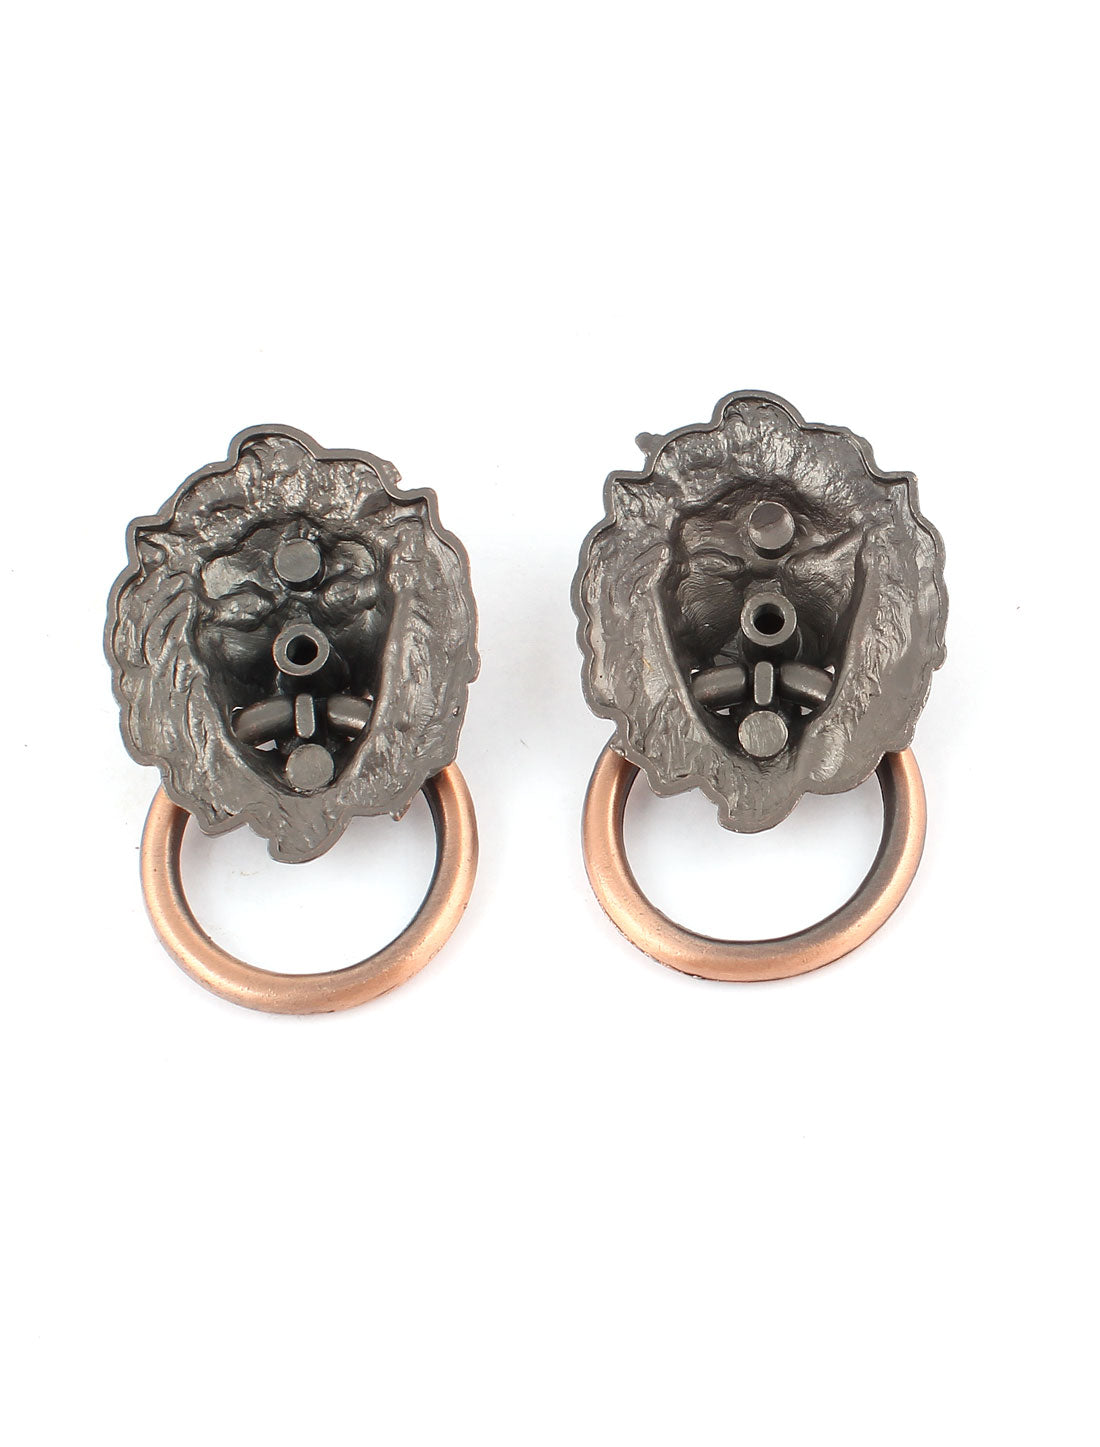 uxcell Uxcell 2pcs Lion Head Shape Dresser Cupboard Door Pull Ring Handle Knob Copper Tone